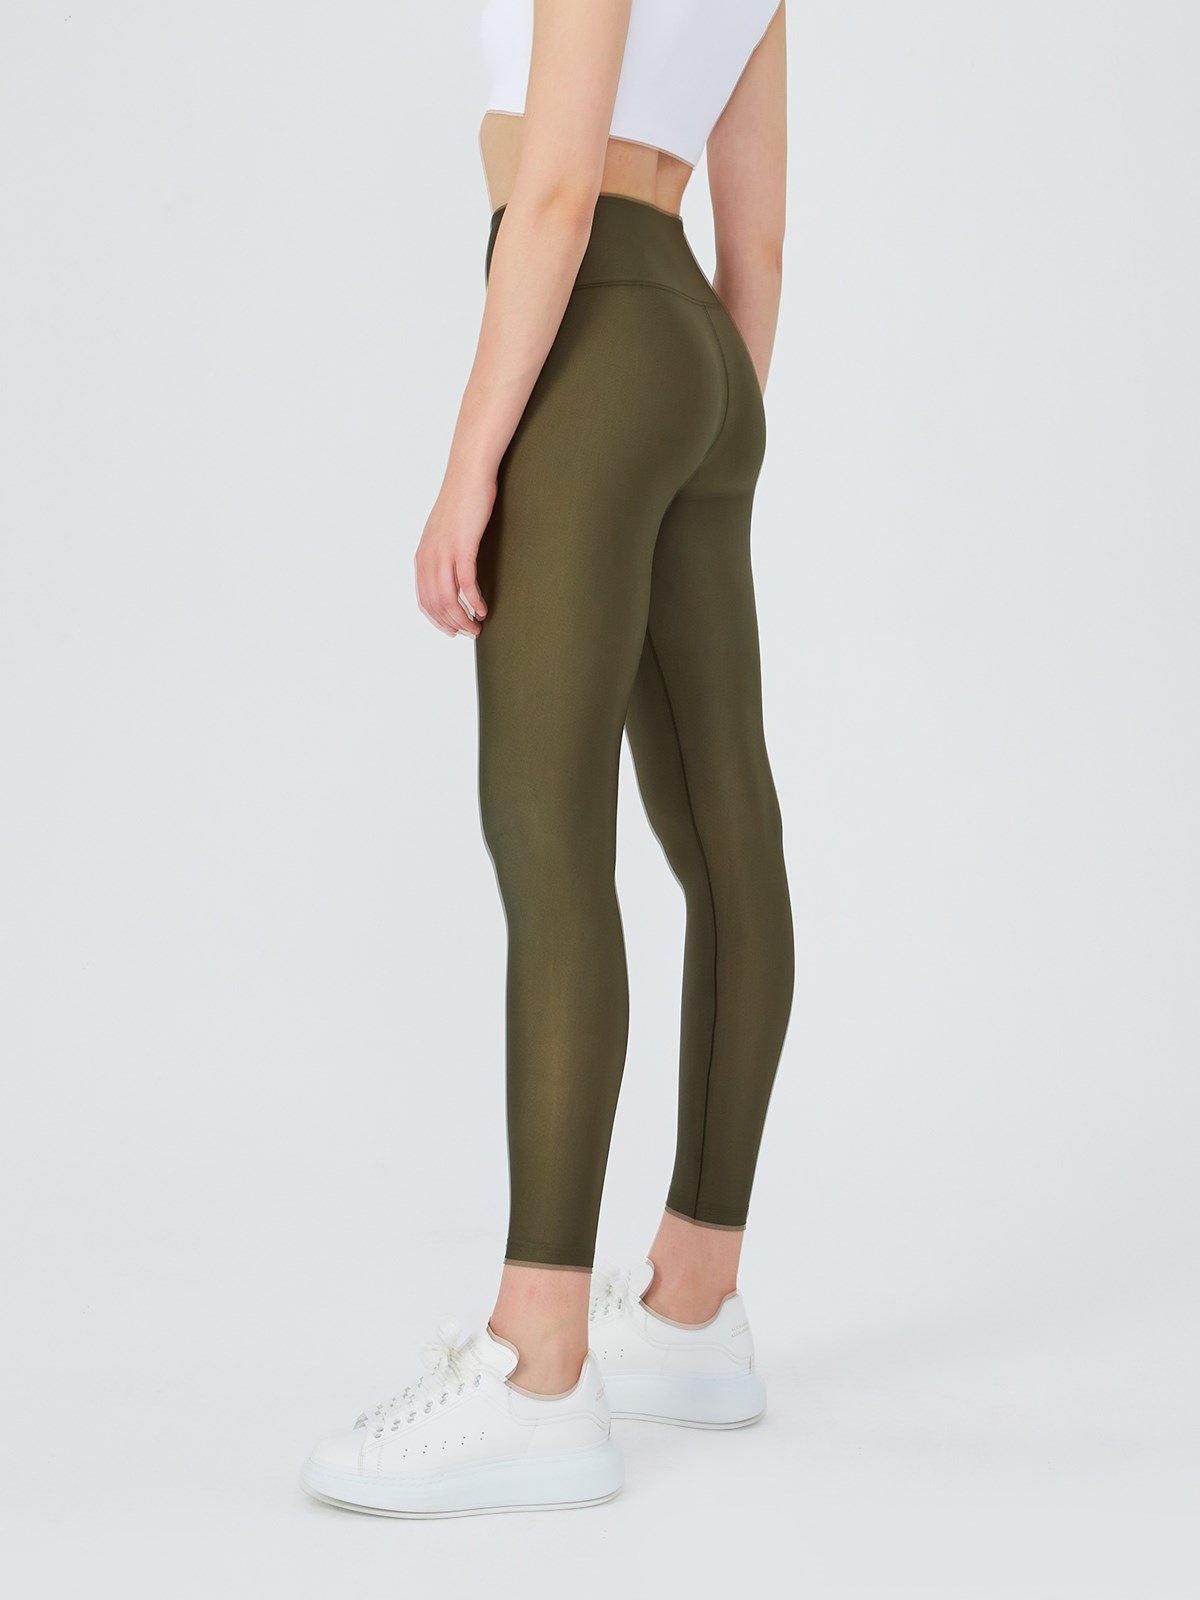 Olive Green Ankle Fit Leggings for Women – Fitflex